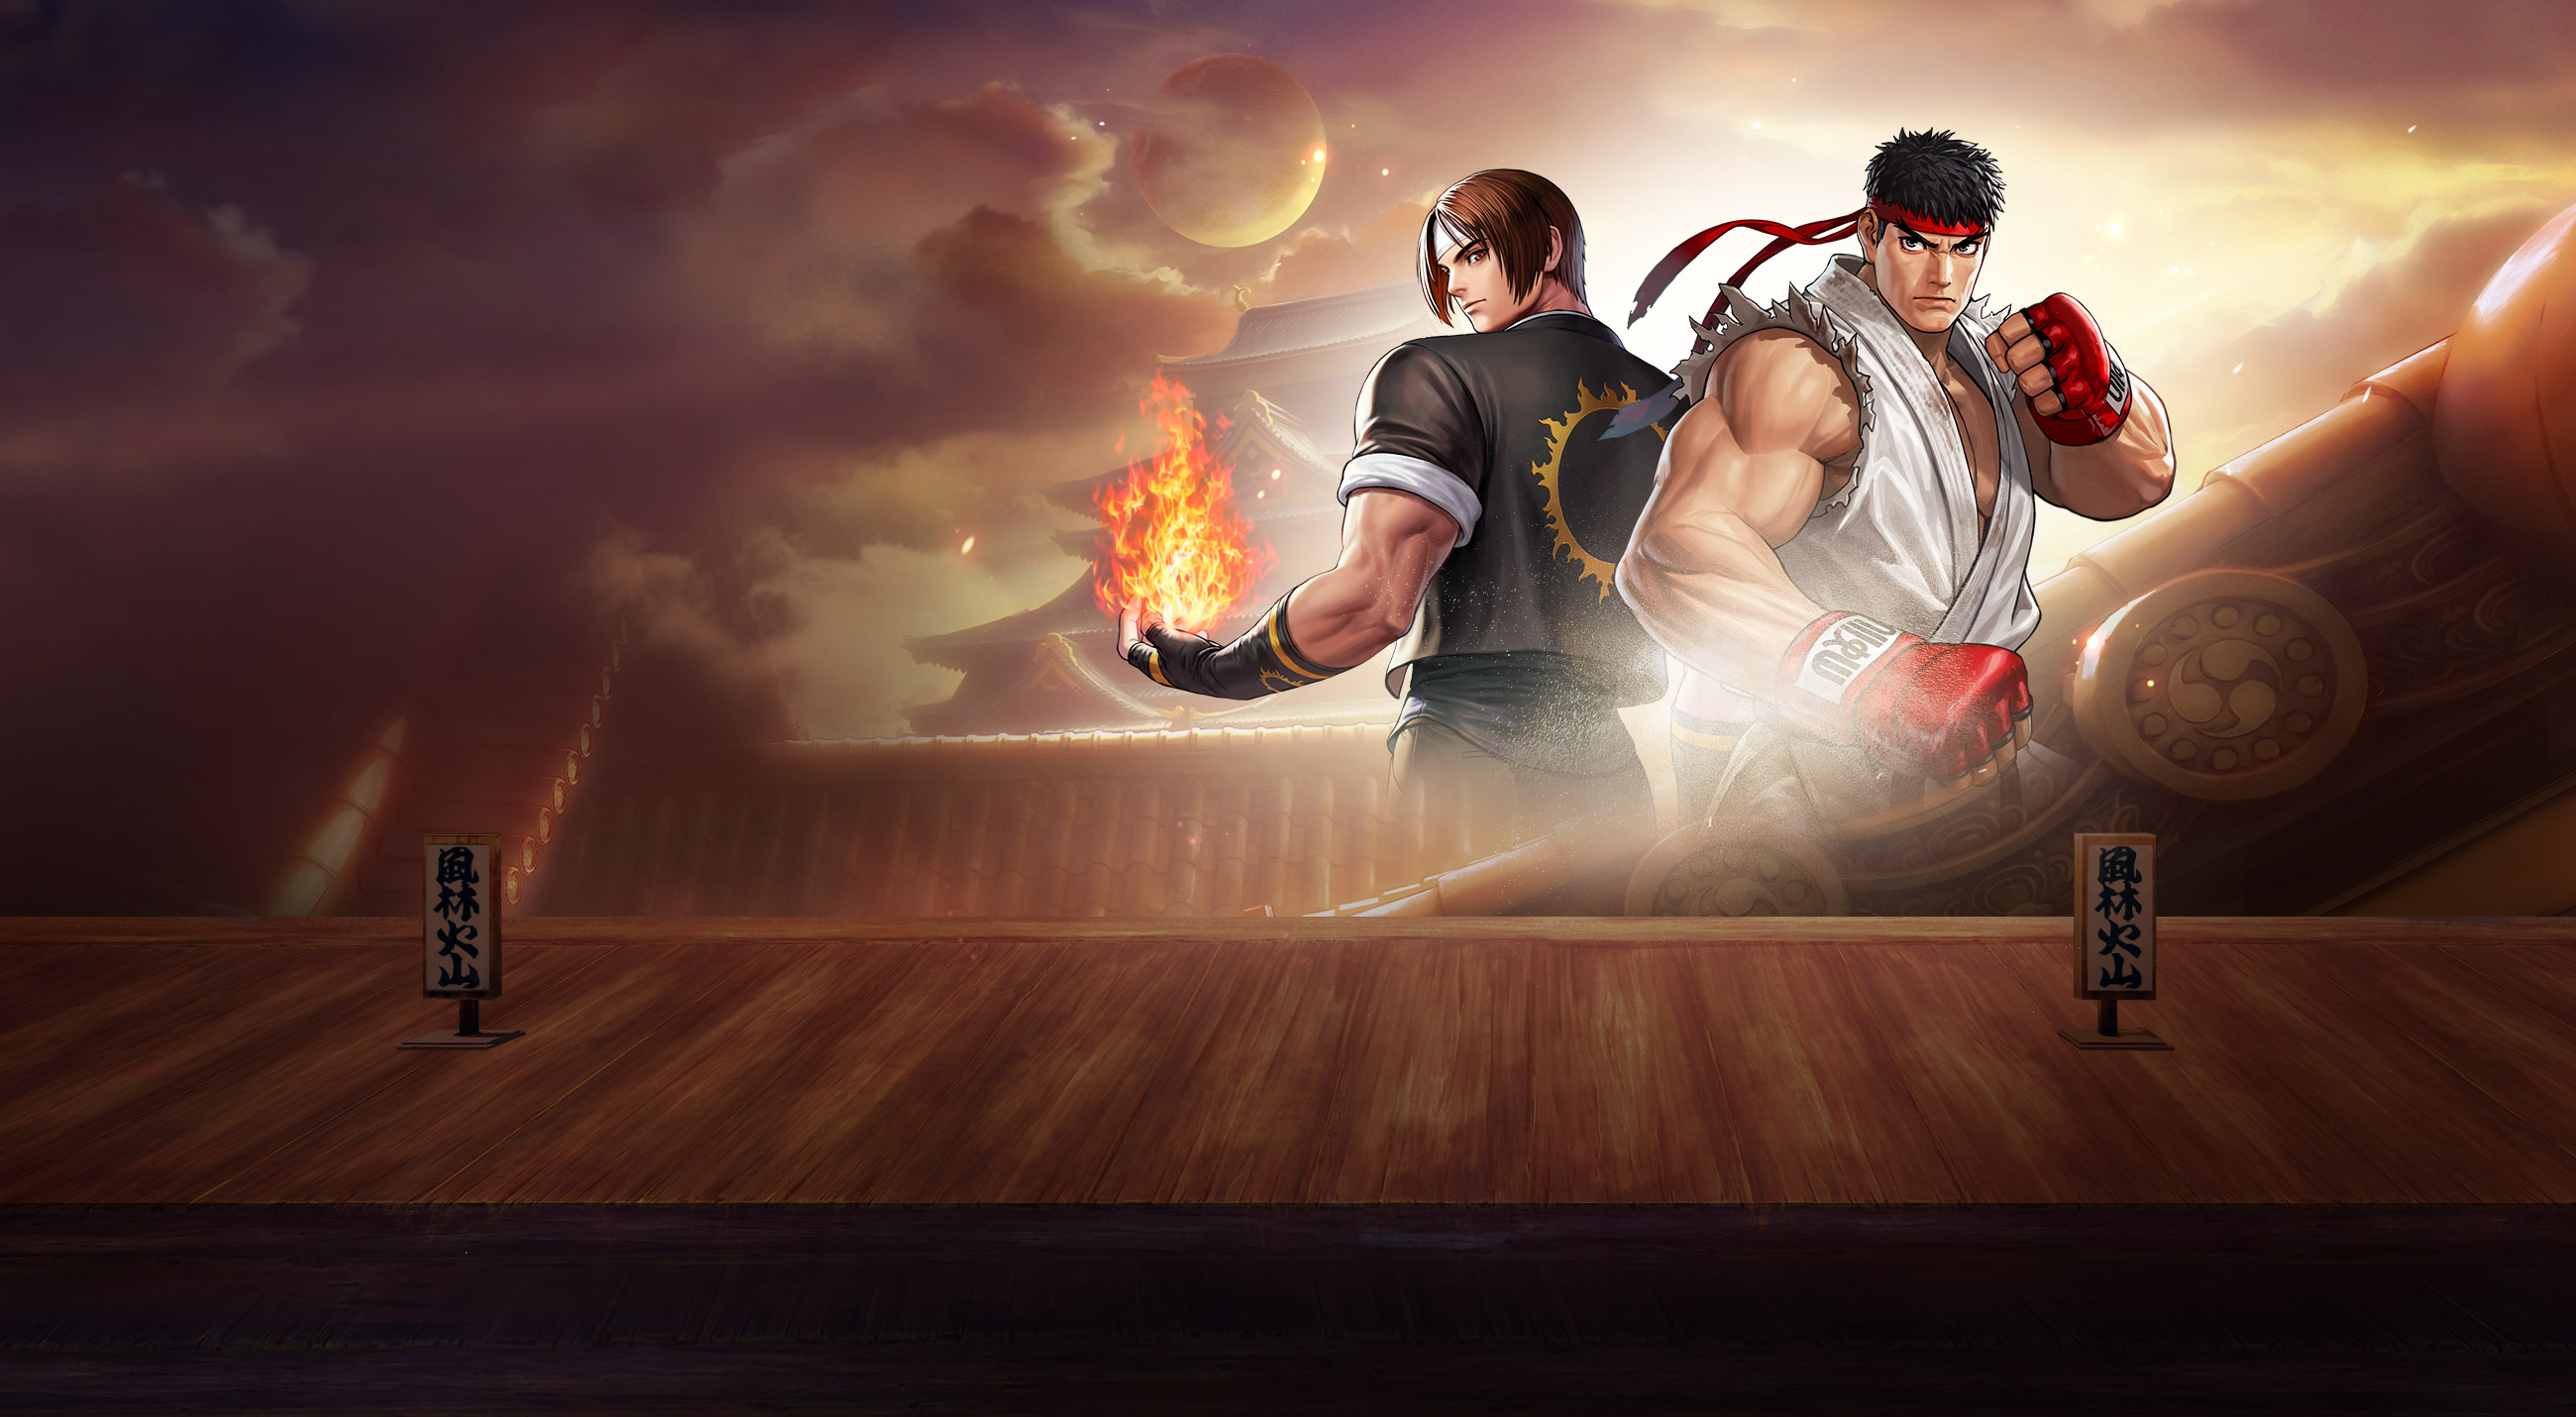 king of fighters, kyo kusanagi, video game, crossover, ryu (street fighter), street fighter